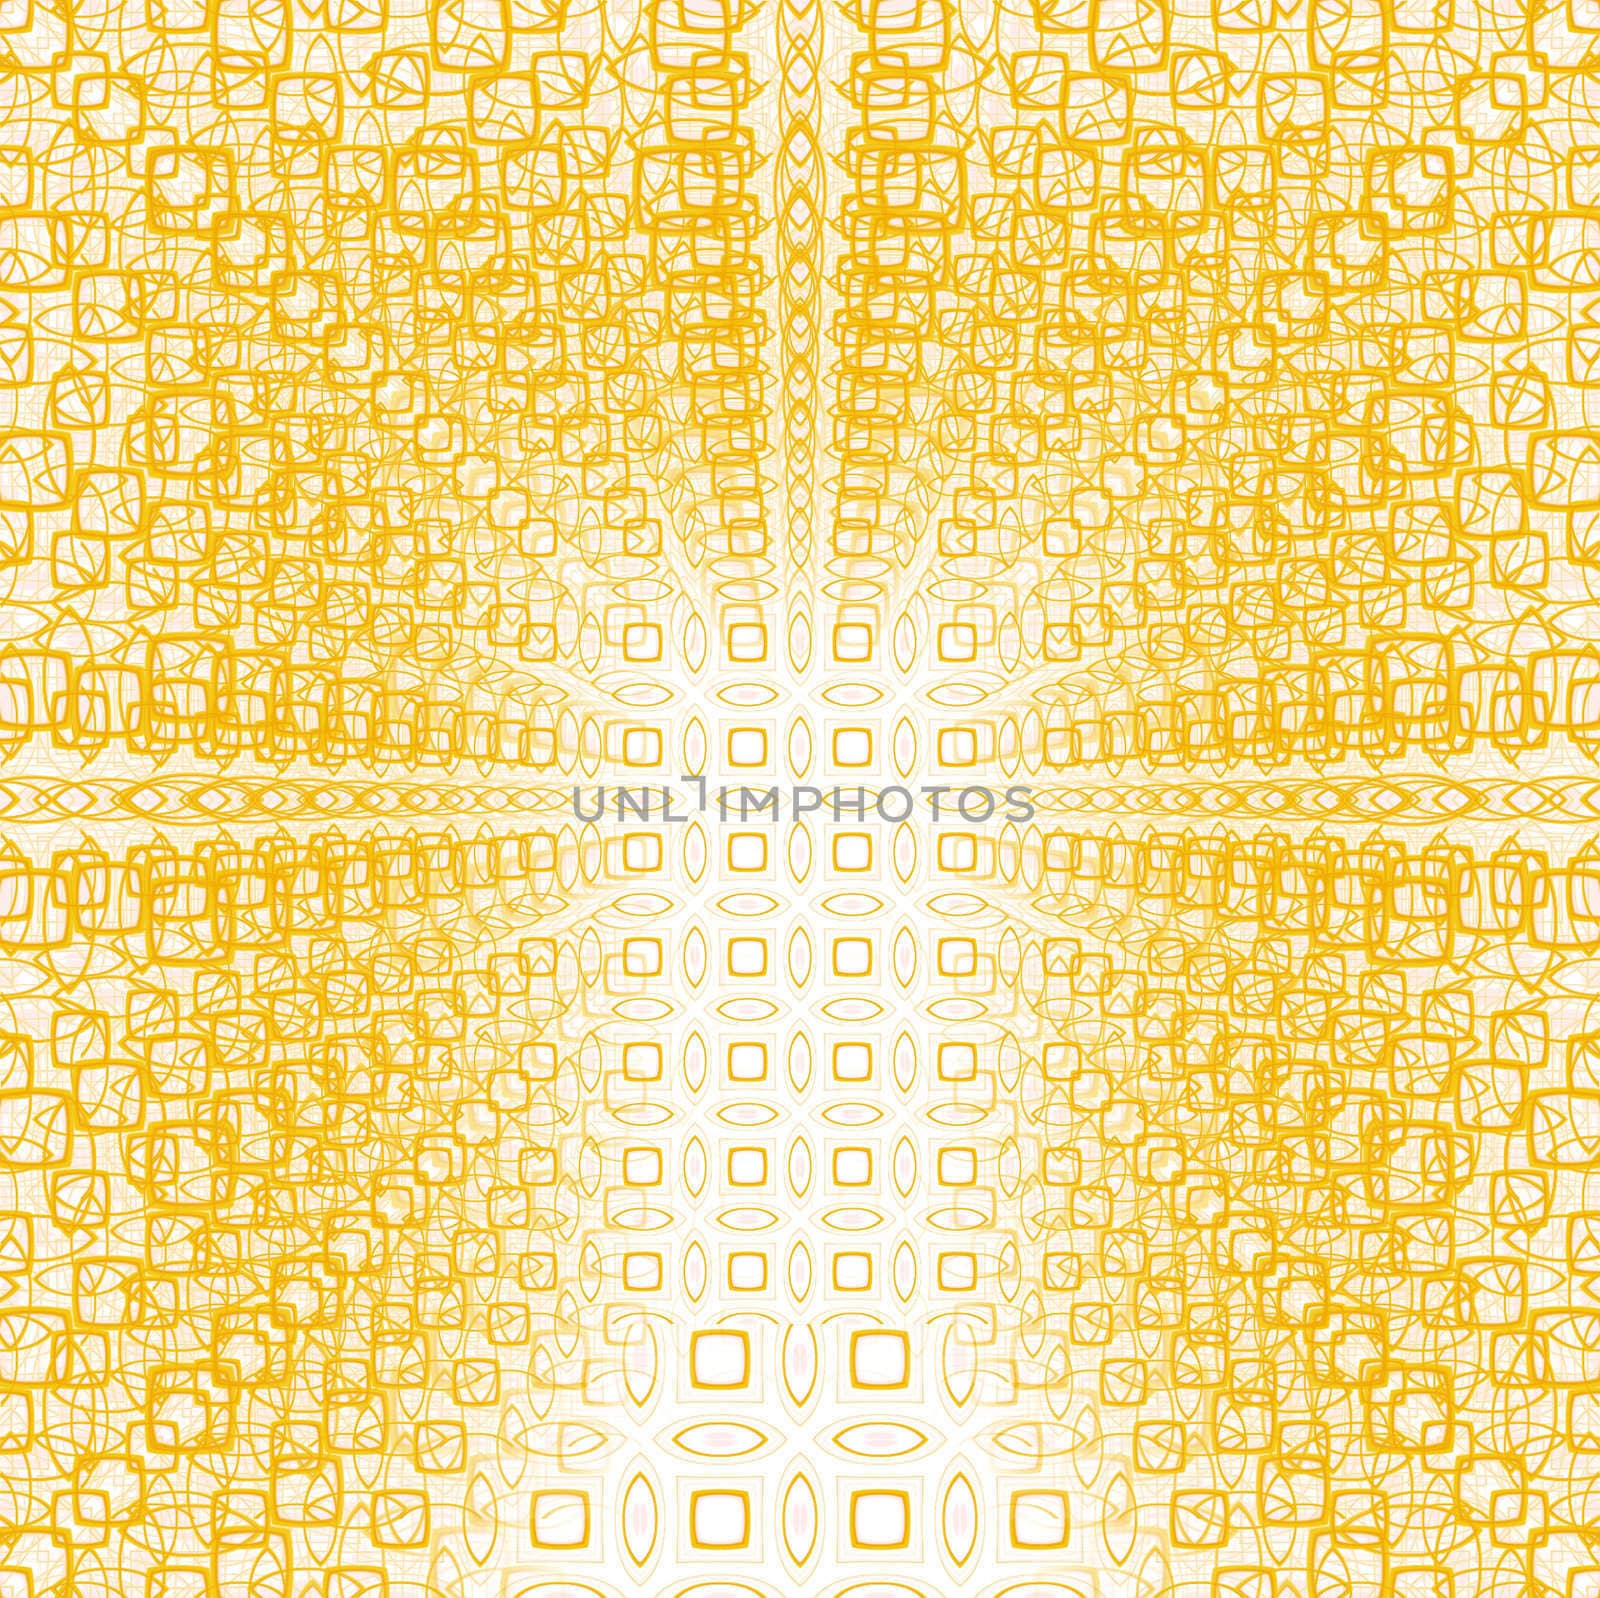 texture of many yellow shapes over eachother suggesting depth